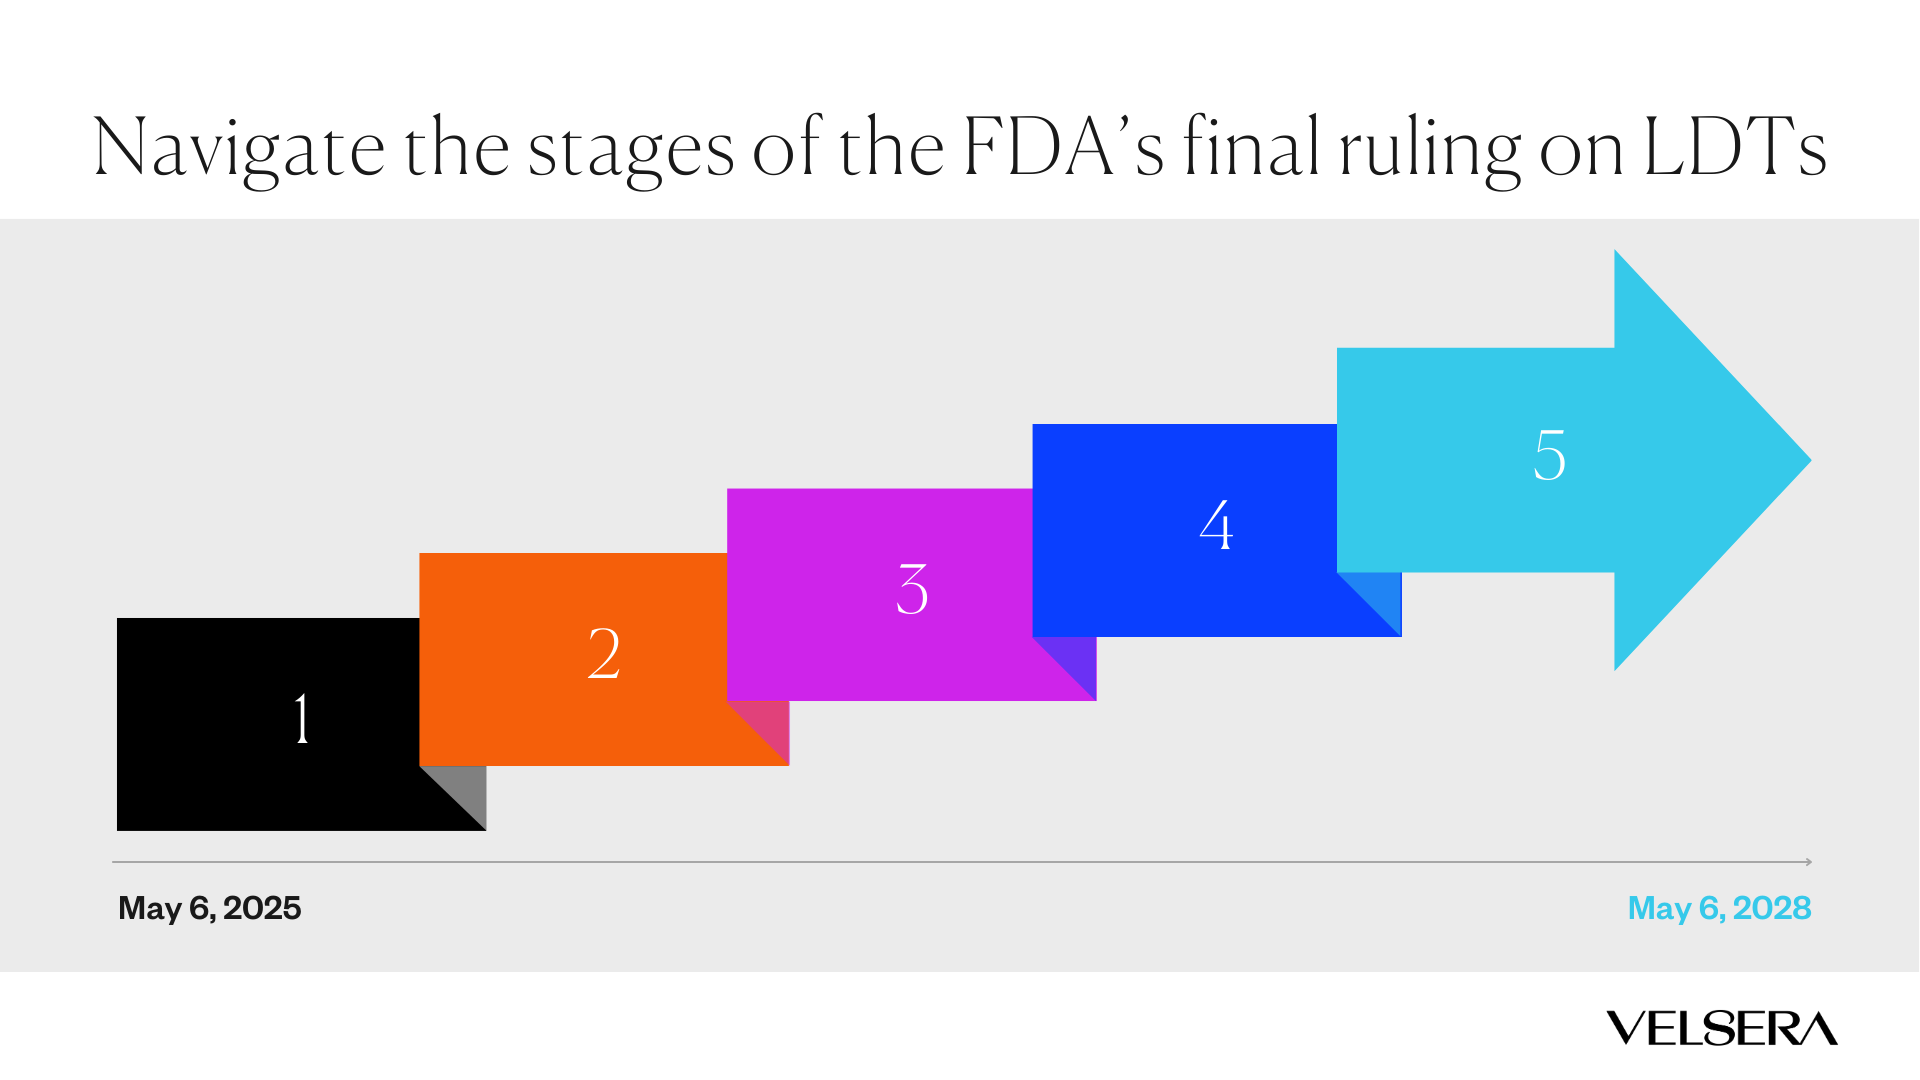 Four Years, Five Stages: the FDA's Final Rule on LDTs